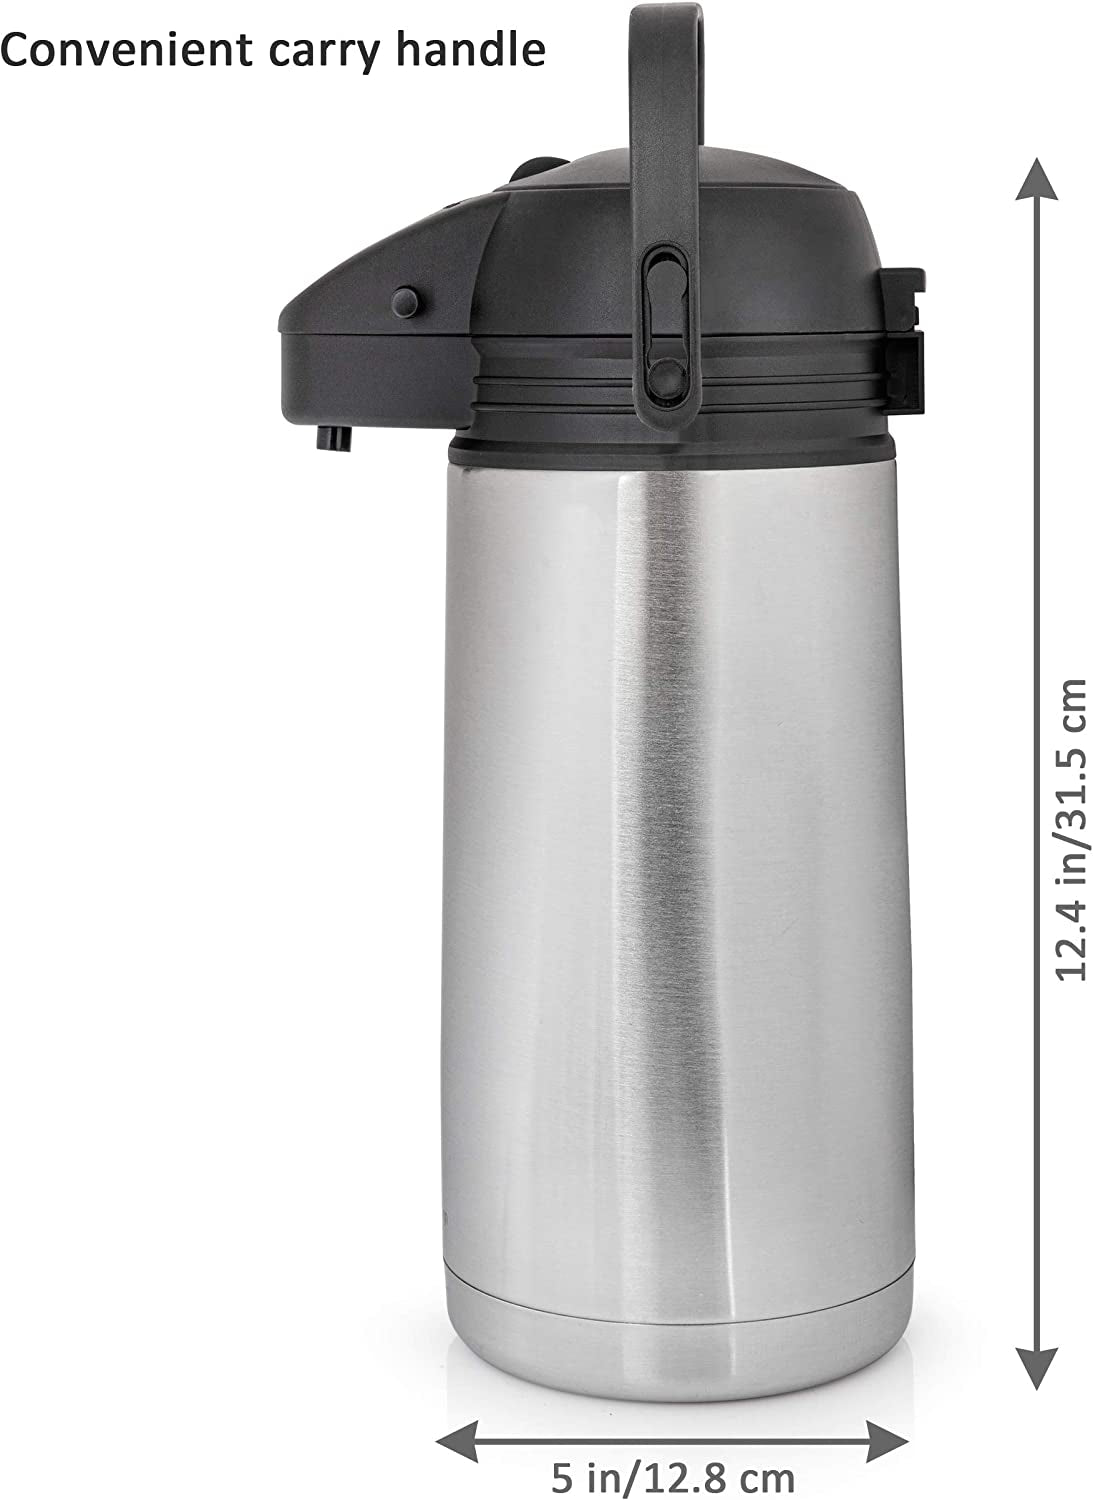 1.9 Liter (64 Oz) Airpot Coffee Dispenser with Convenient Push Button | BPA-Free Stainless Steel Carafe | Double-Wall Vacuum Insulated Thermos 